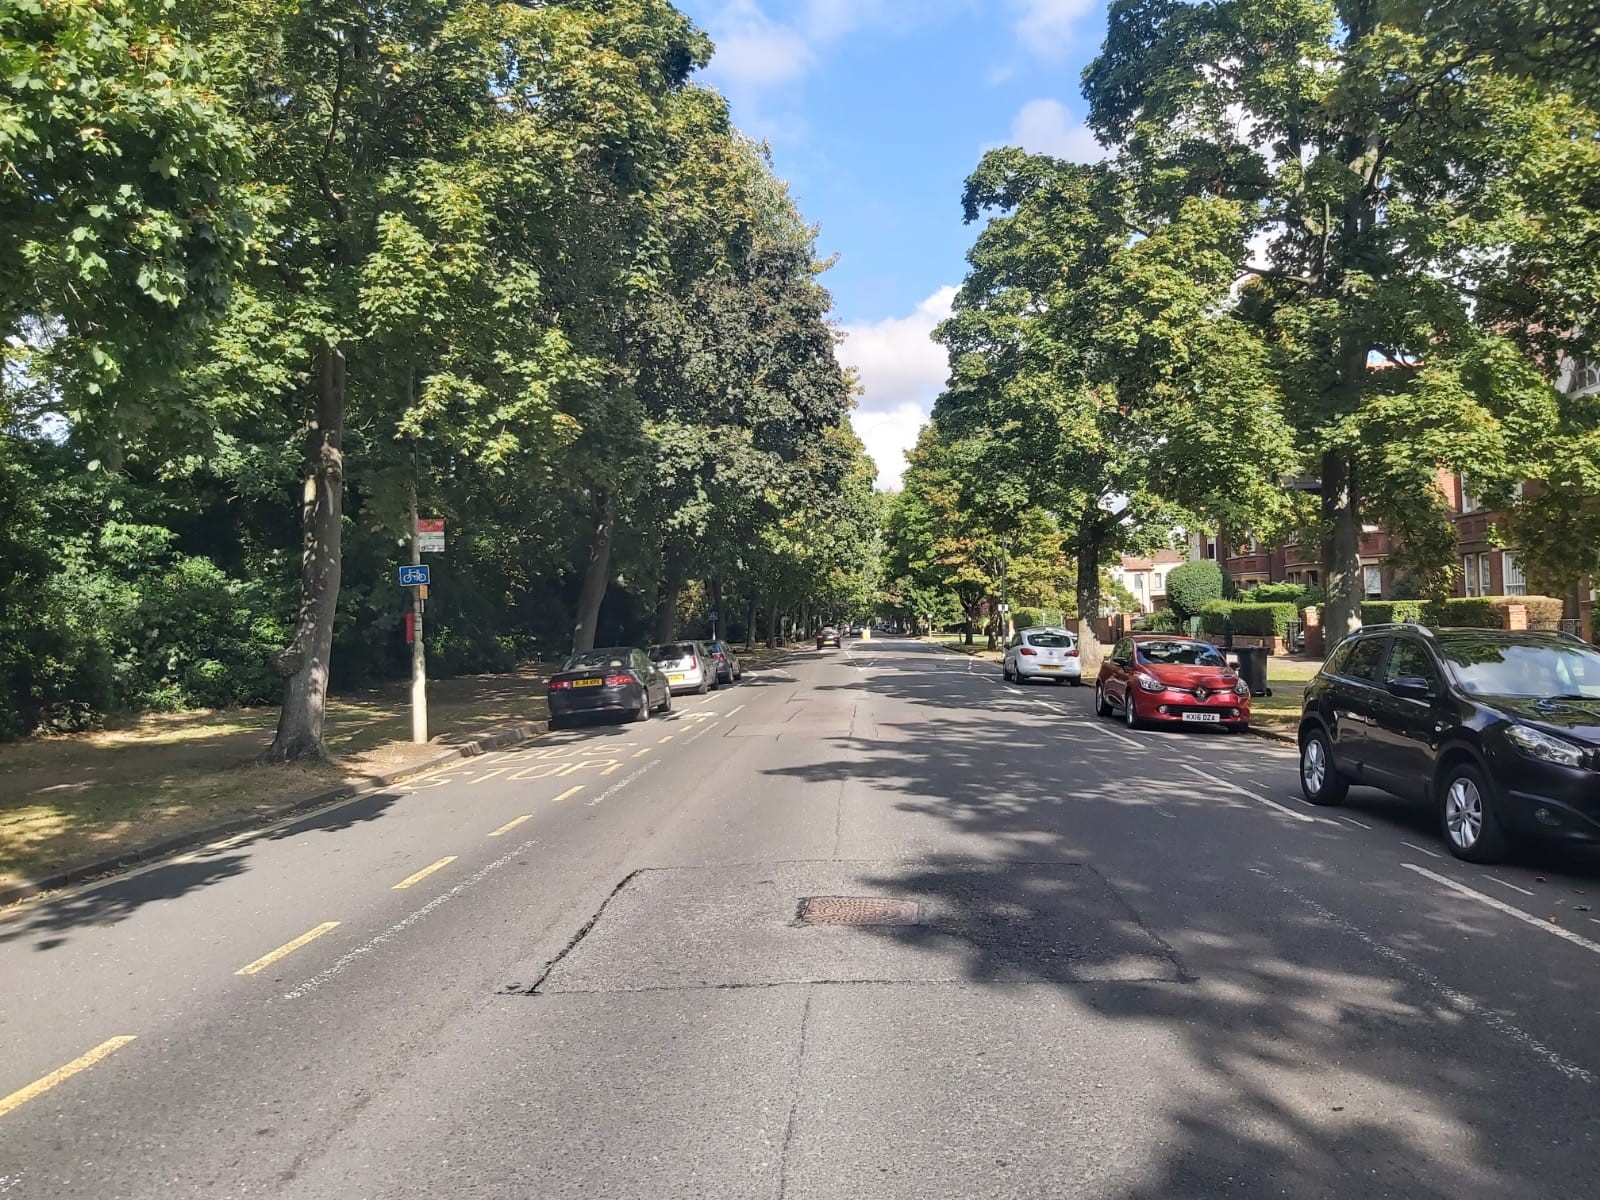 Wide road lined by trees on both sides